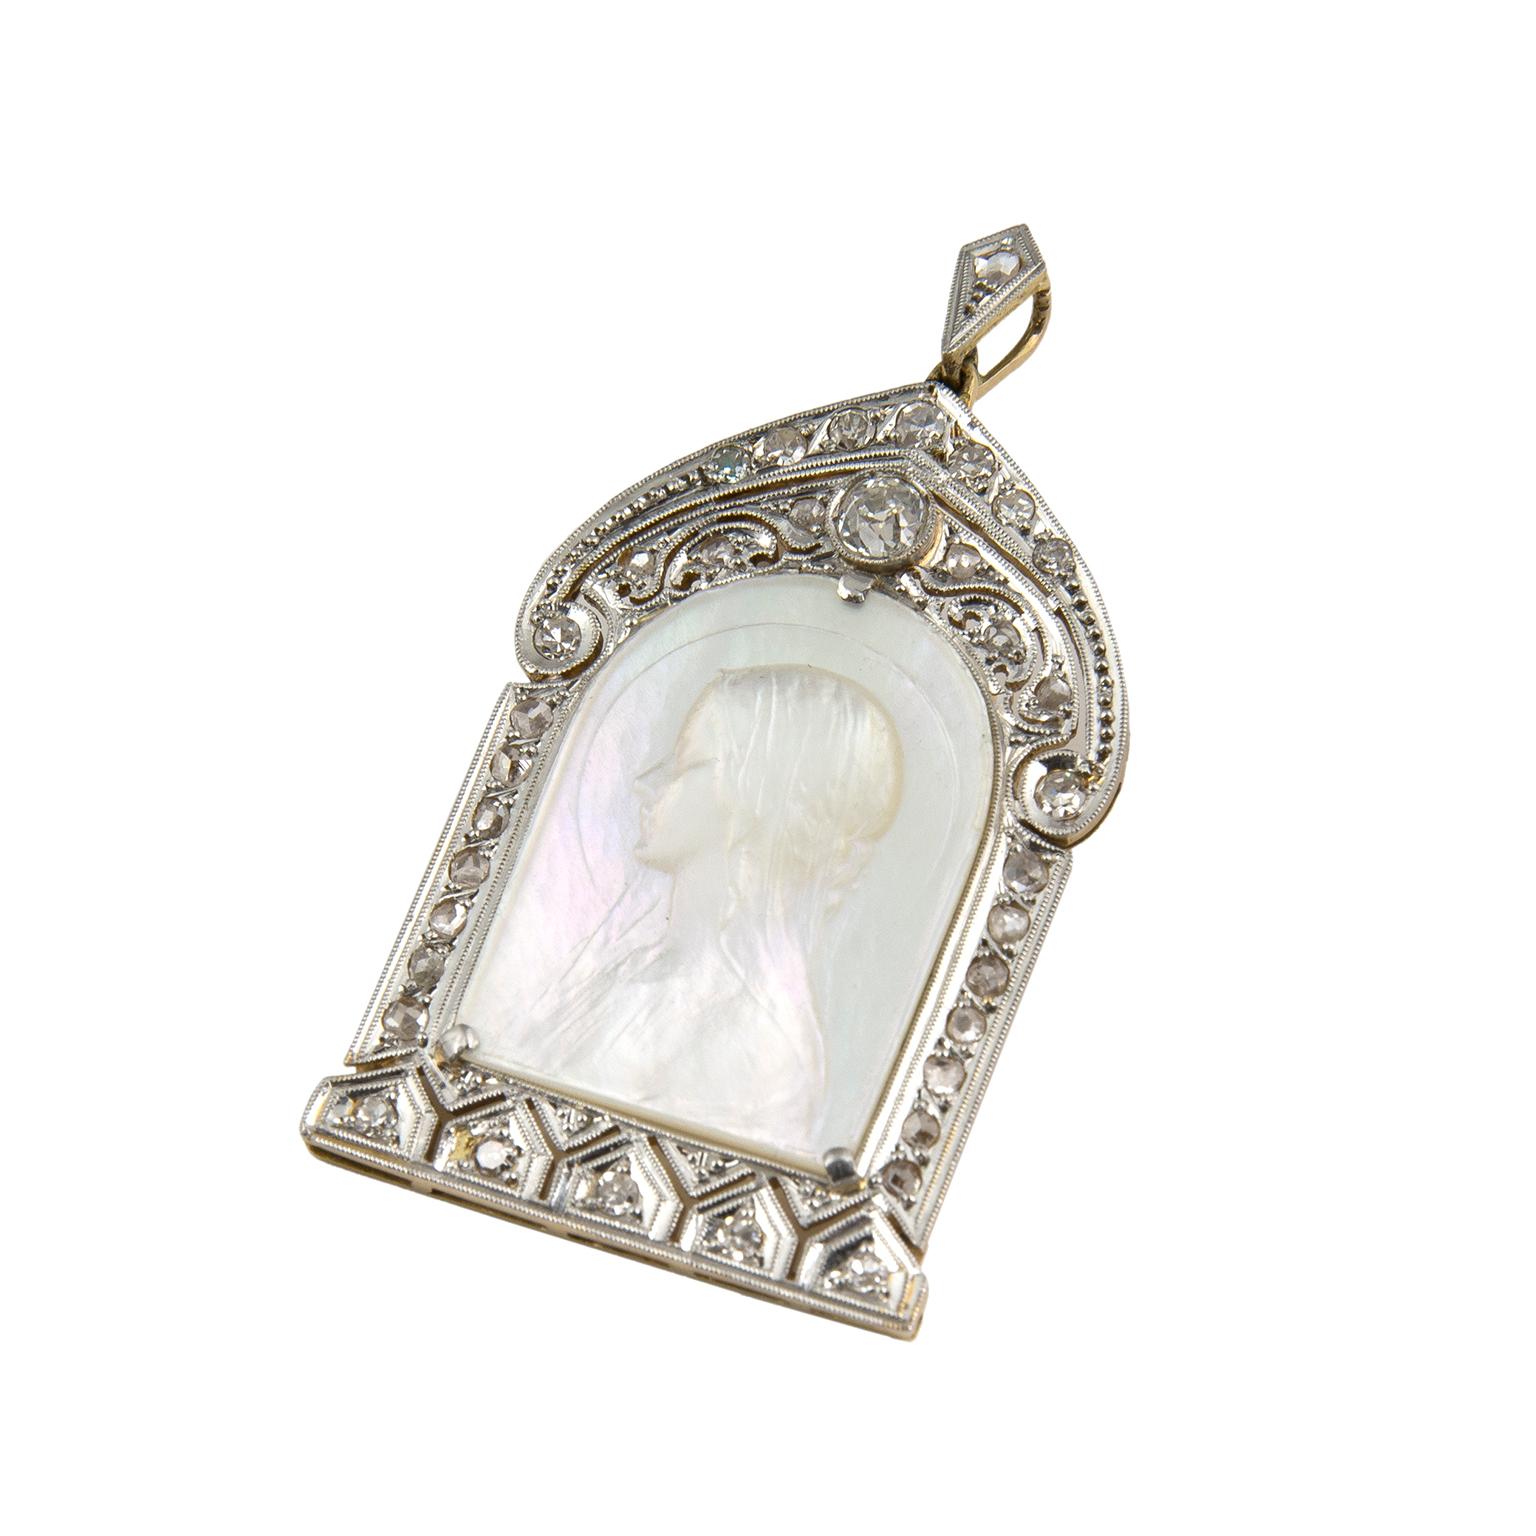 Art Deco Madonna pendant in platinum-topped 18 Karat gold, with 0.30 carats in diamonds and mother-of-pearl.
Dimensions: 4.7 x 4.1 cm (1.85 x 1.61 in)